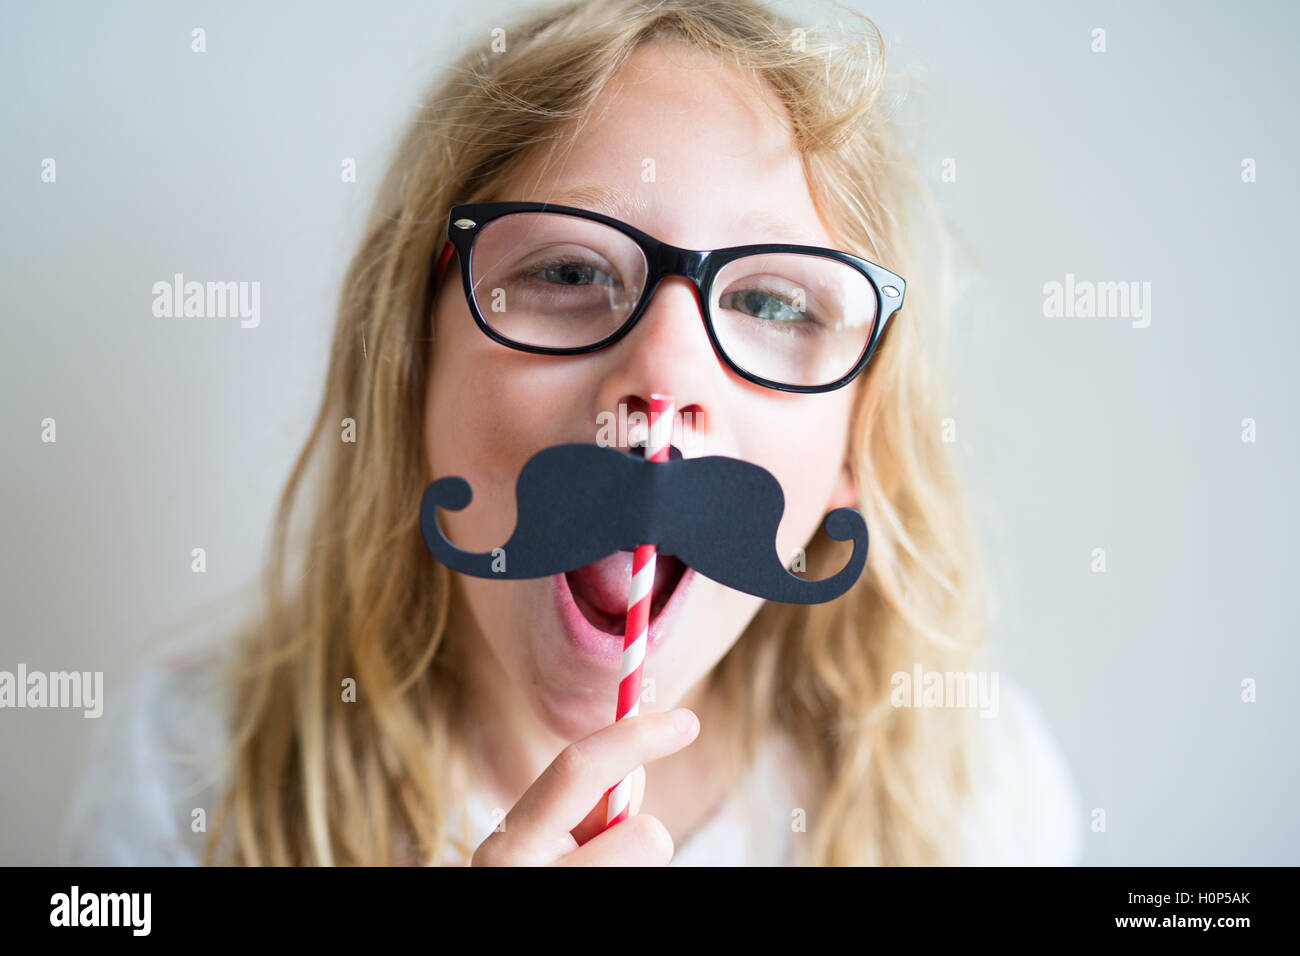 Portrait of a girl with a fake mustache Stock Photo